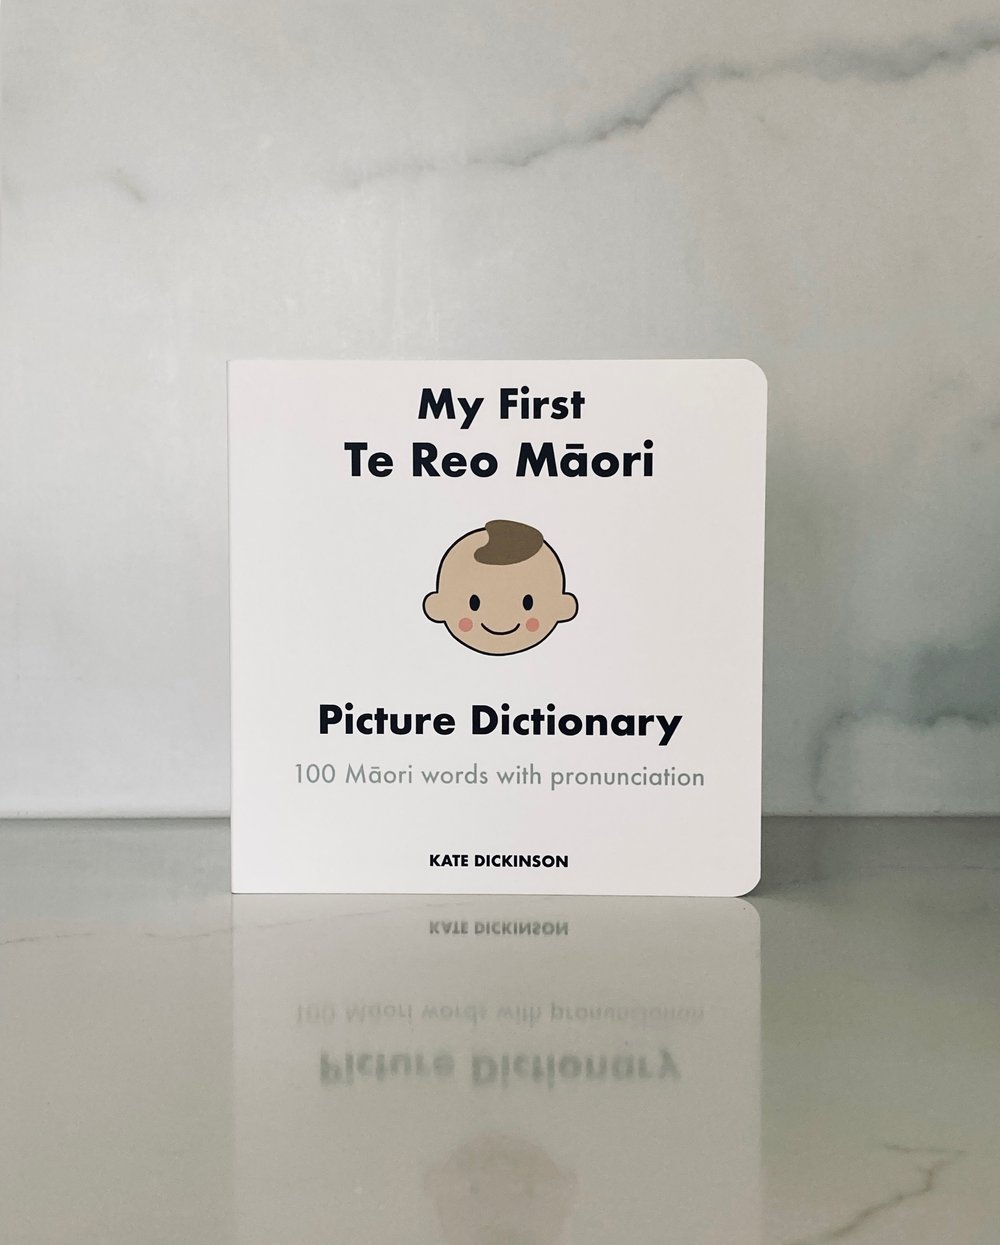 My First Te Reo Māori Picture Dictionary